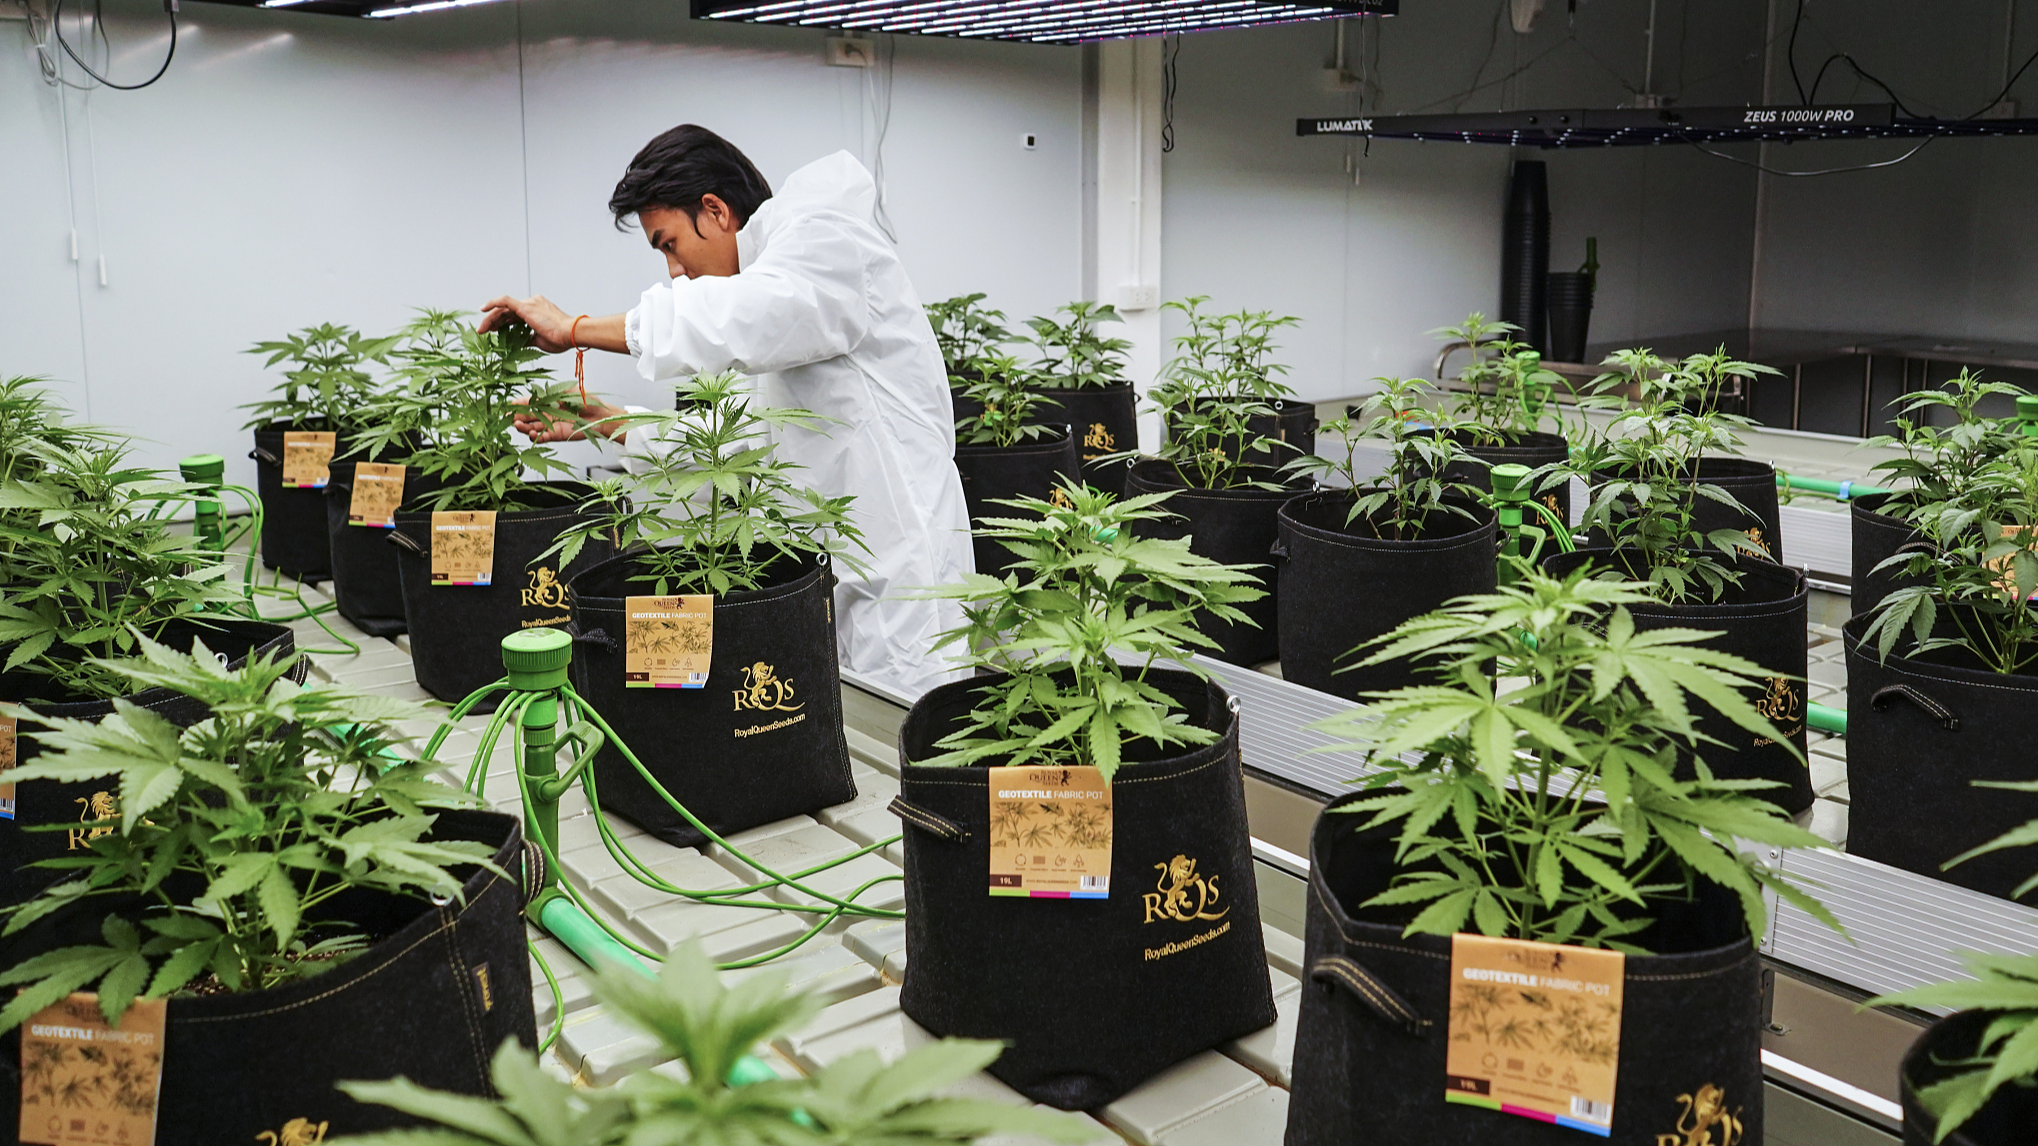 A cannabis grower inspects cannabis plants in an innovative growing room during a cultivation class at Royal Queen Seeds cannabis store in Bangkok, Thailand, September 9, 2023. /CFP